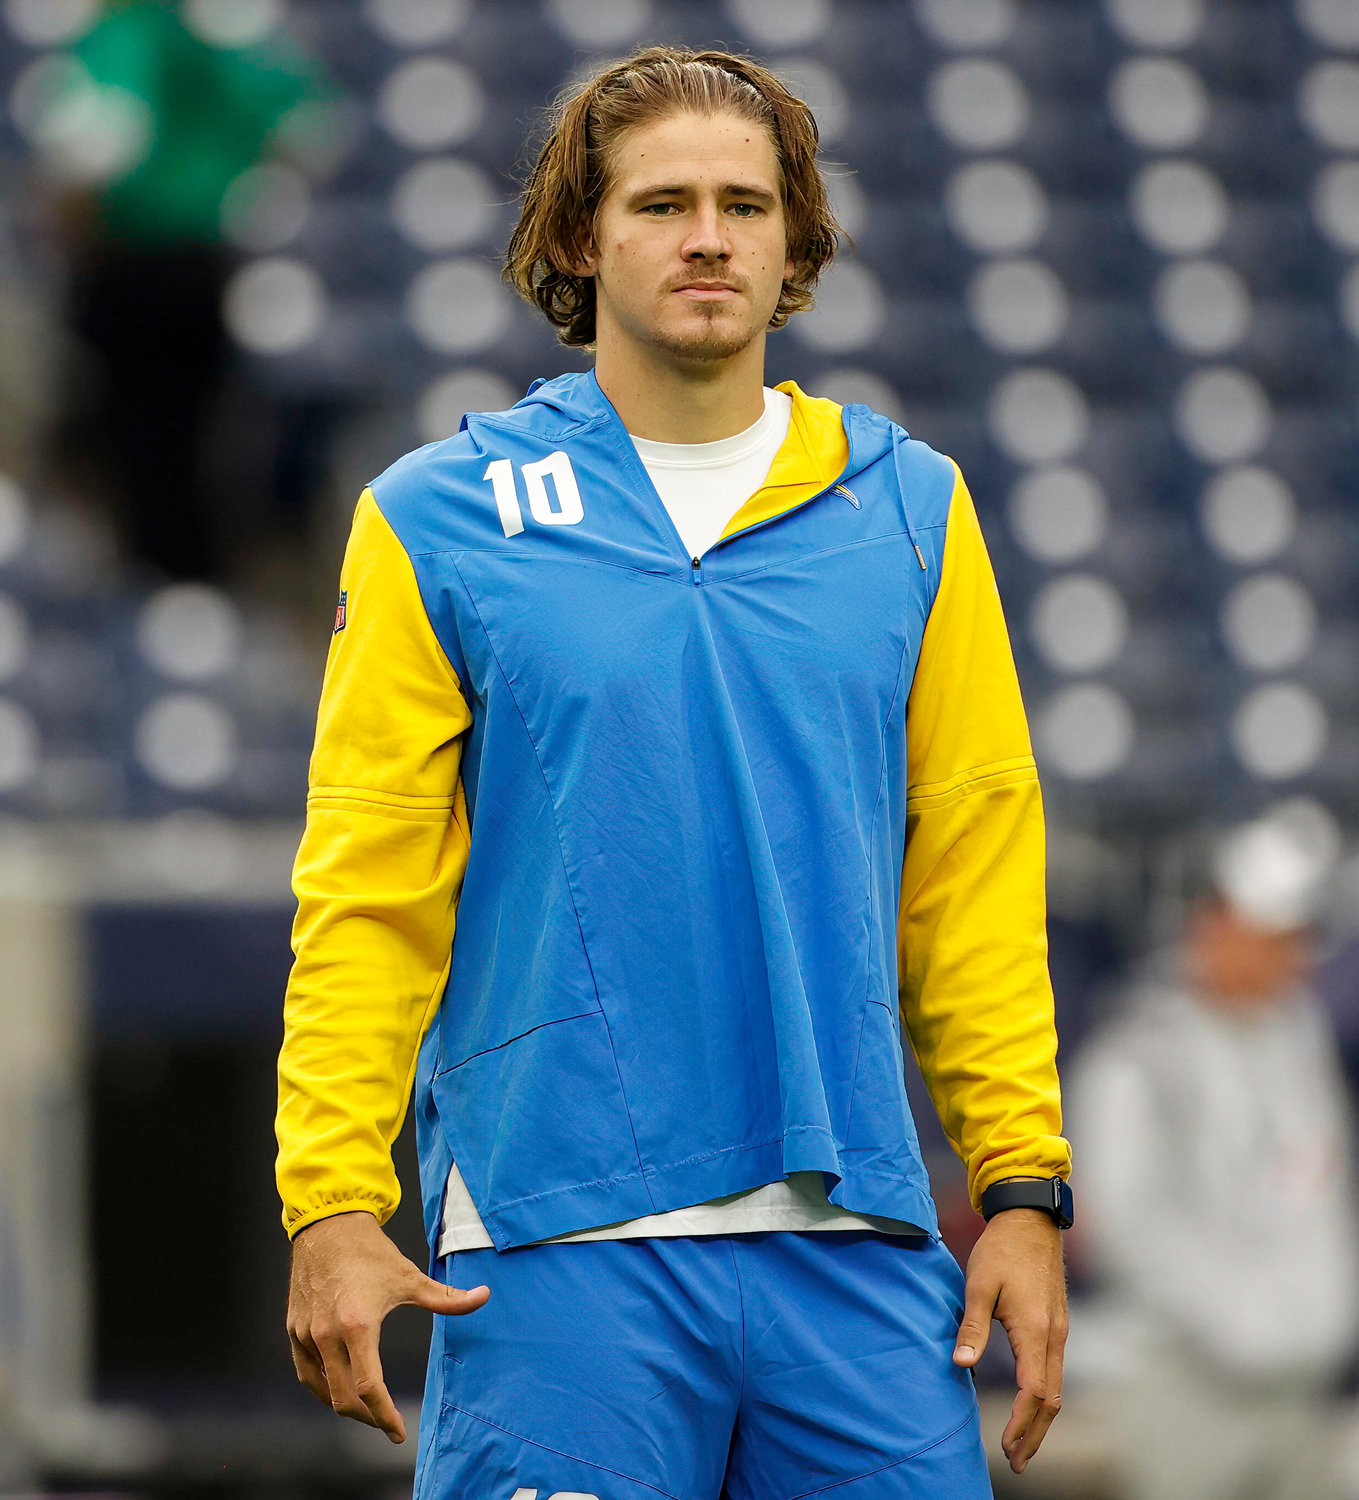 Chargers quarterback Justin Herbert (10) on the field during warmups before an NFL game between the Texans and the Chargers on Oct. 2, 2022 in Houston.